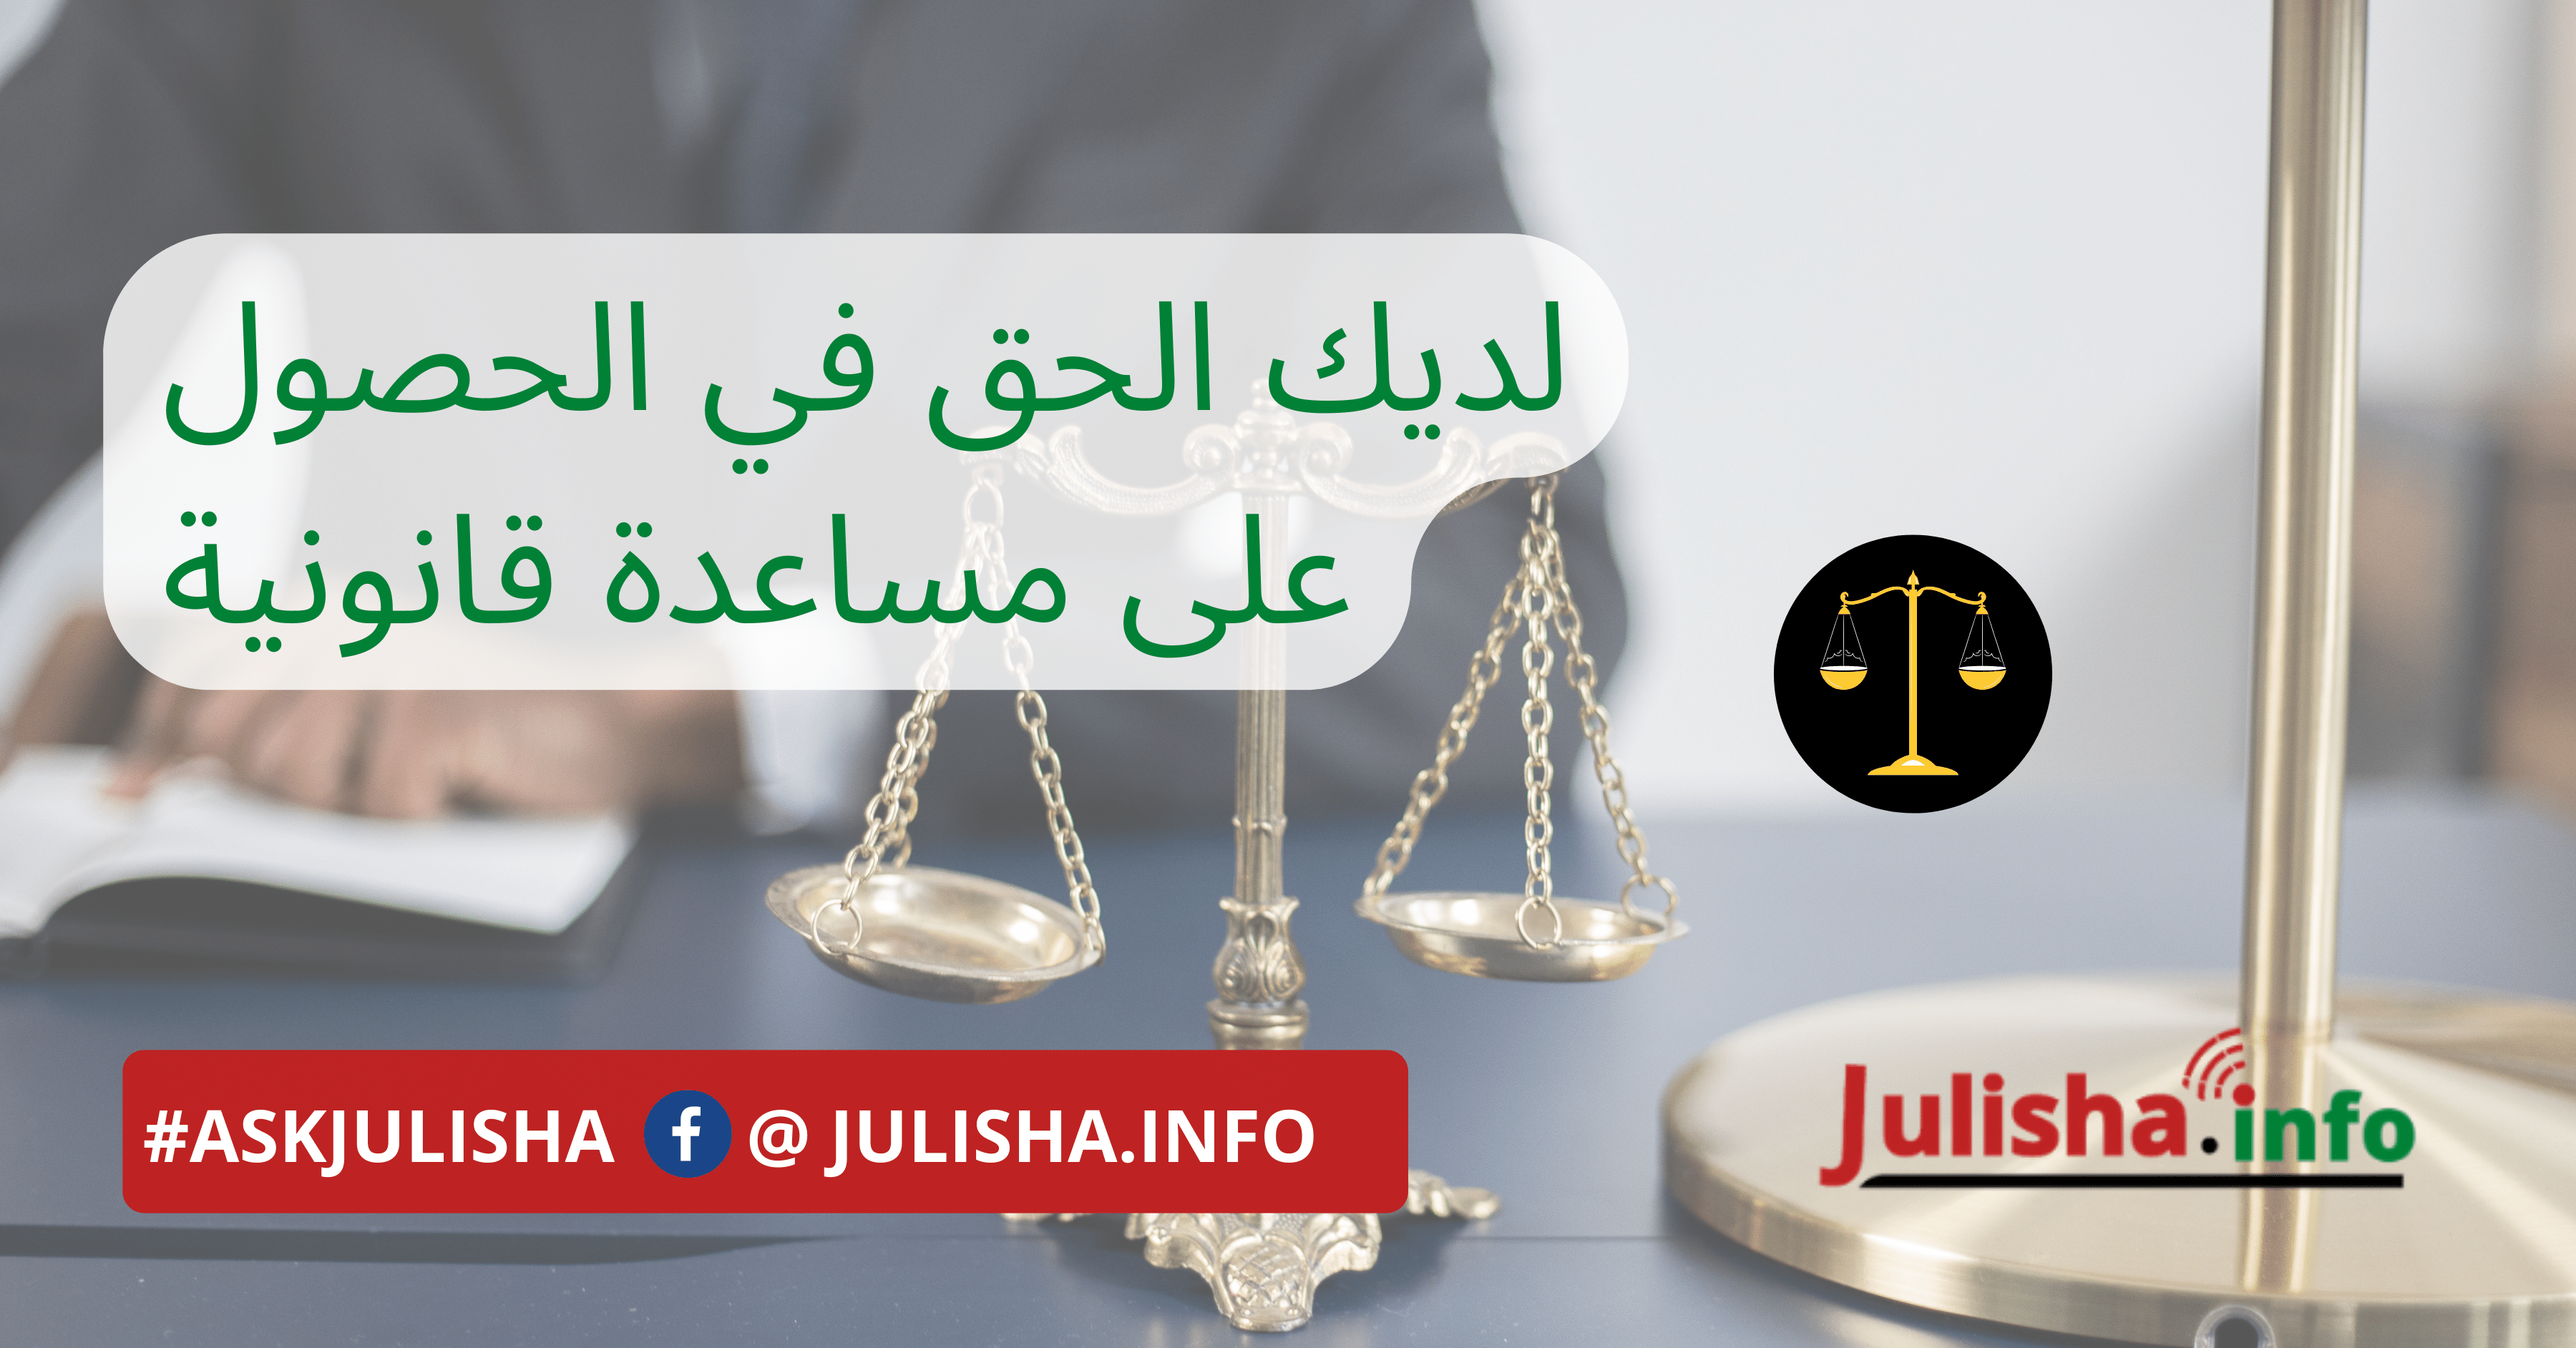 JUSTICE_ARABIC_image.png